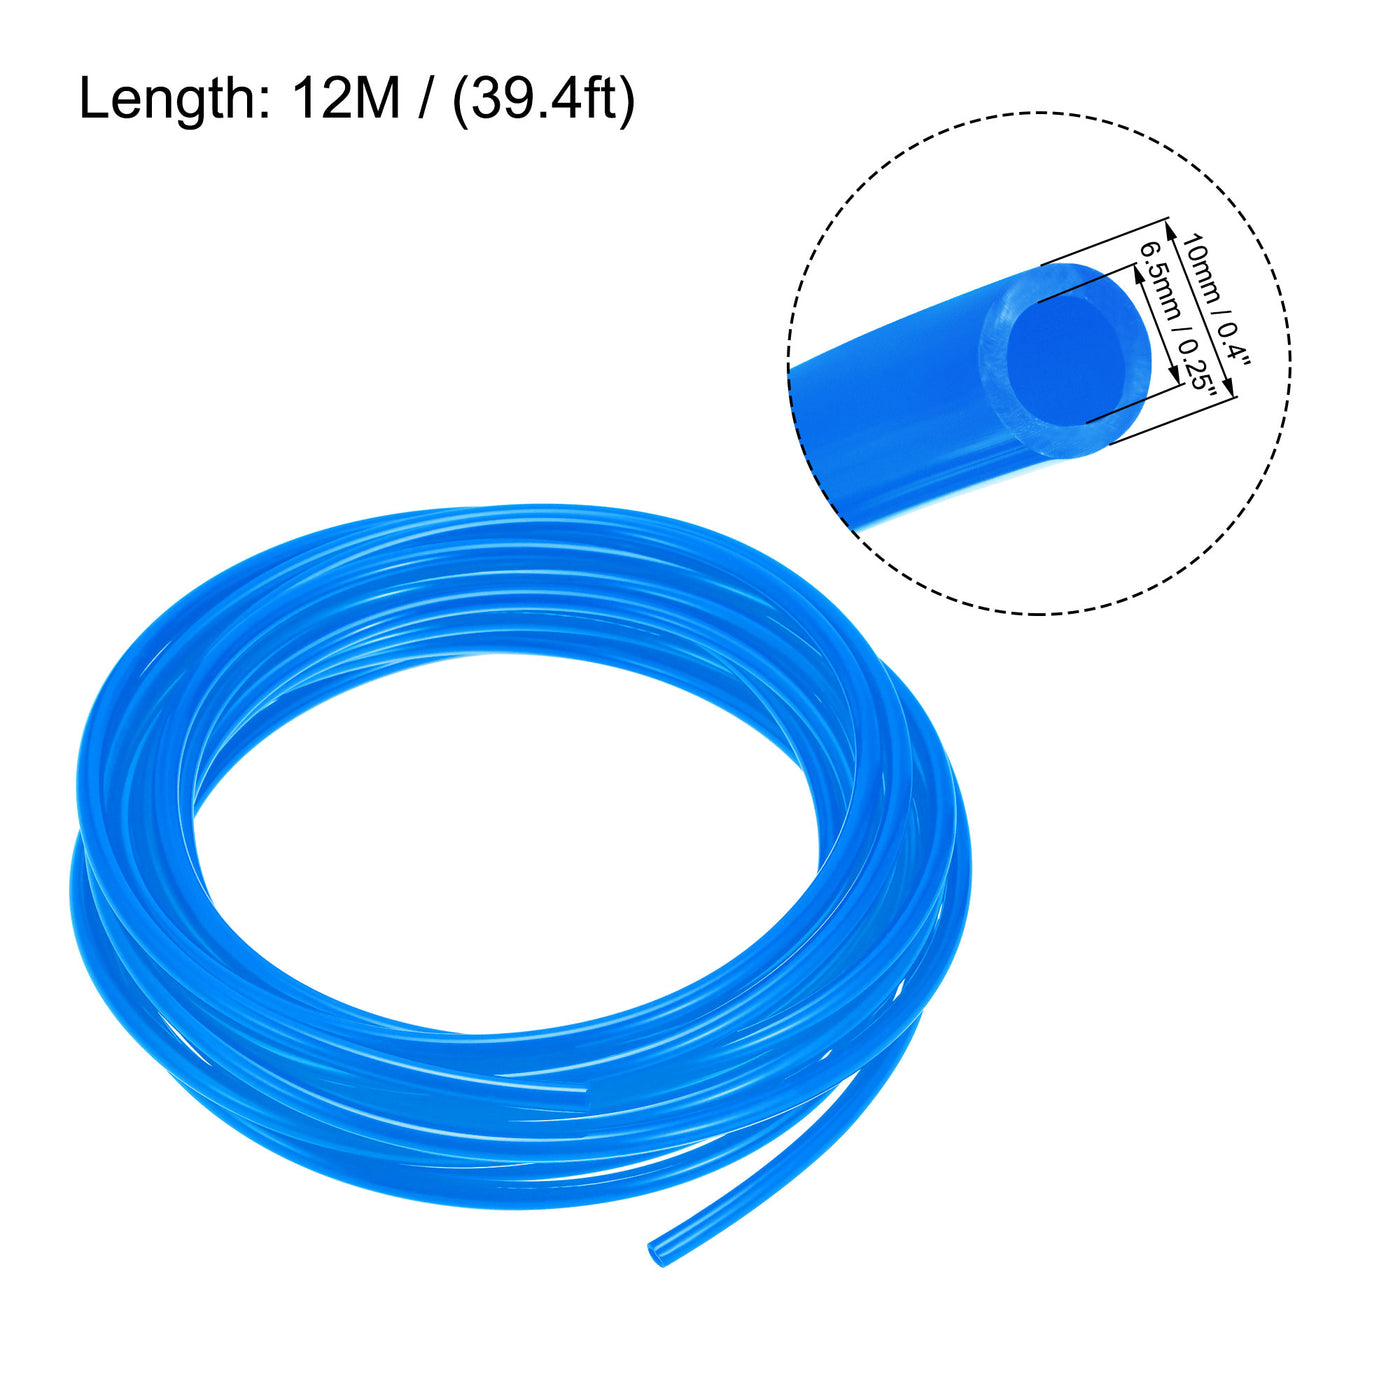 uxcell Uxcell Pneumatic Air Hose Tubing Air Compressor Tube 6.5mm/0.25''ID x 10mm/0.4''OD x 12m/39.4Ft Polyurethane Pipe Blue